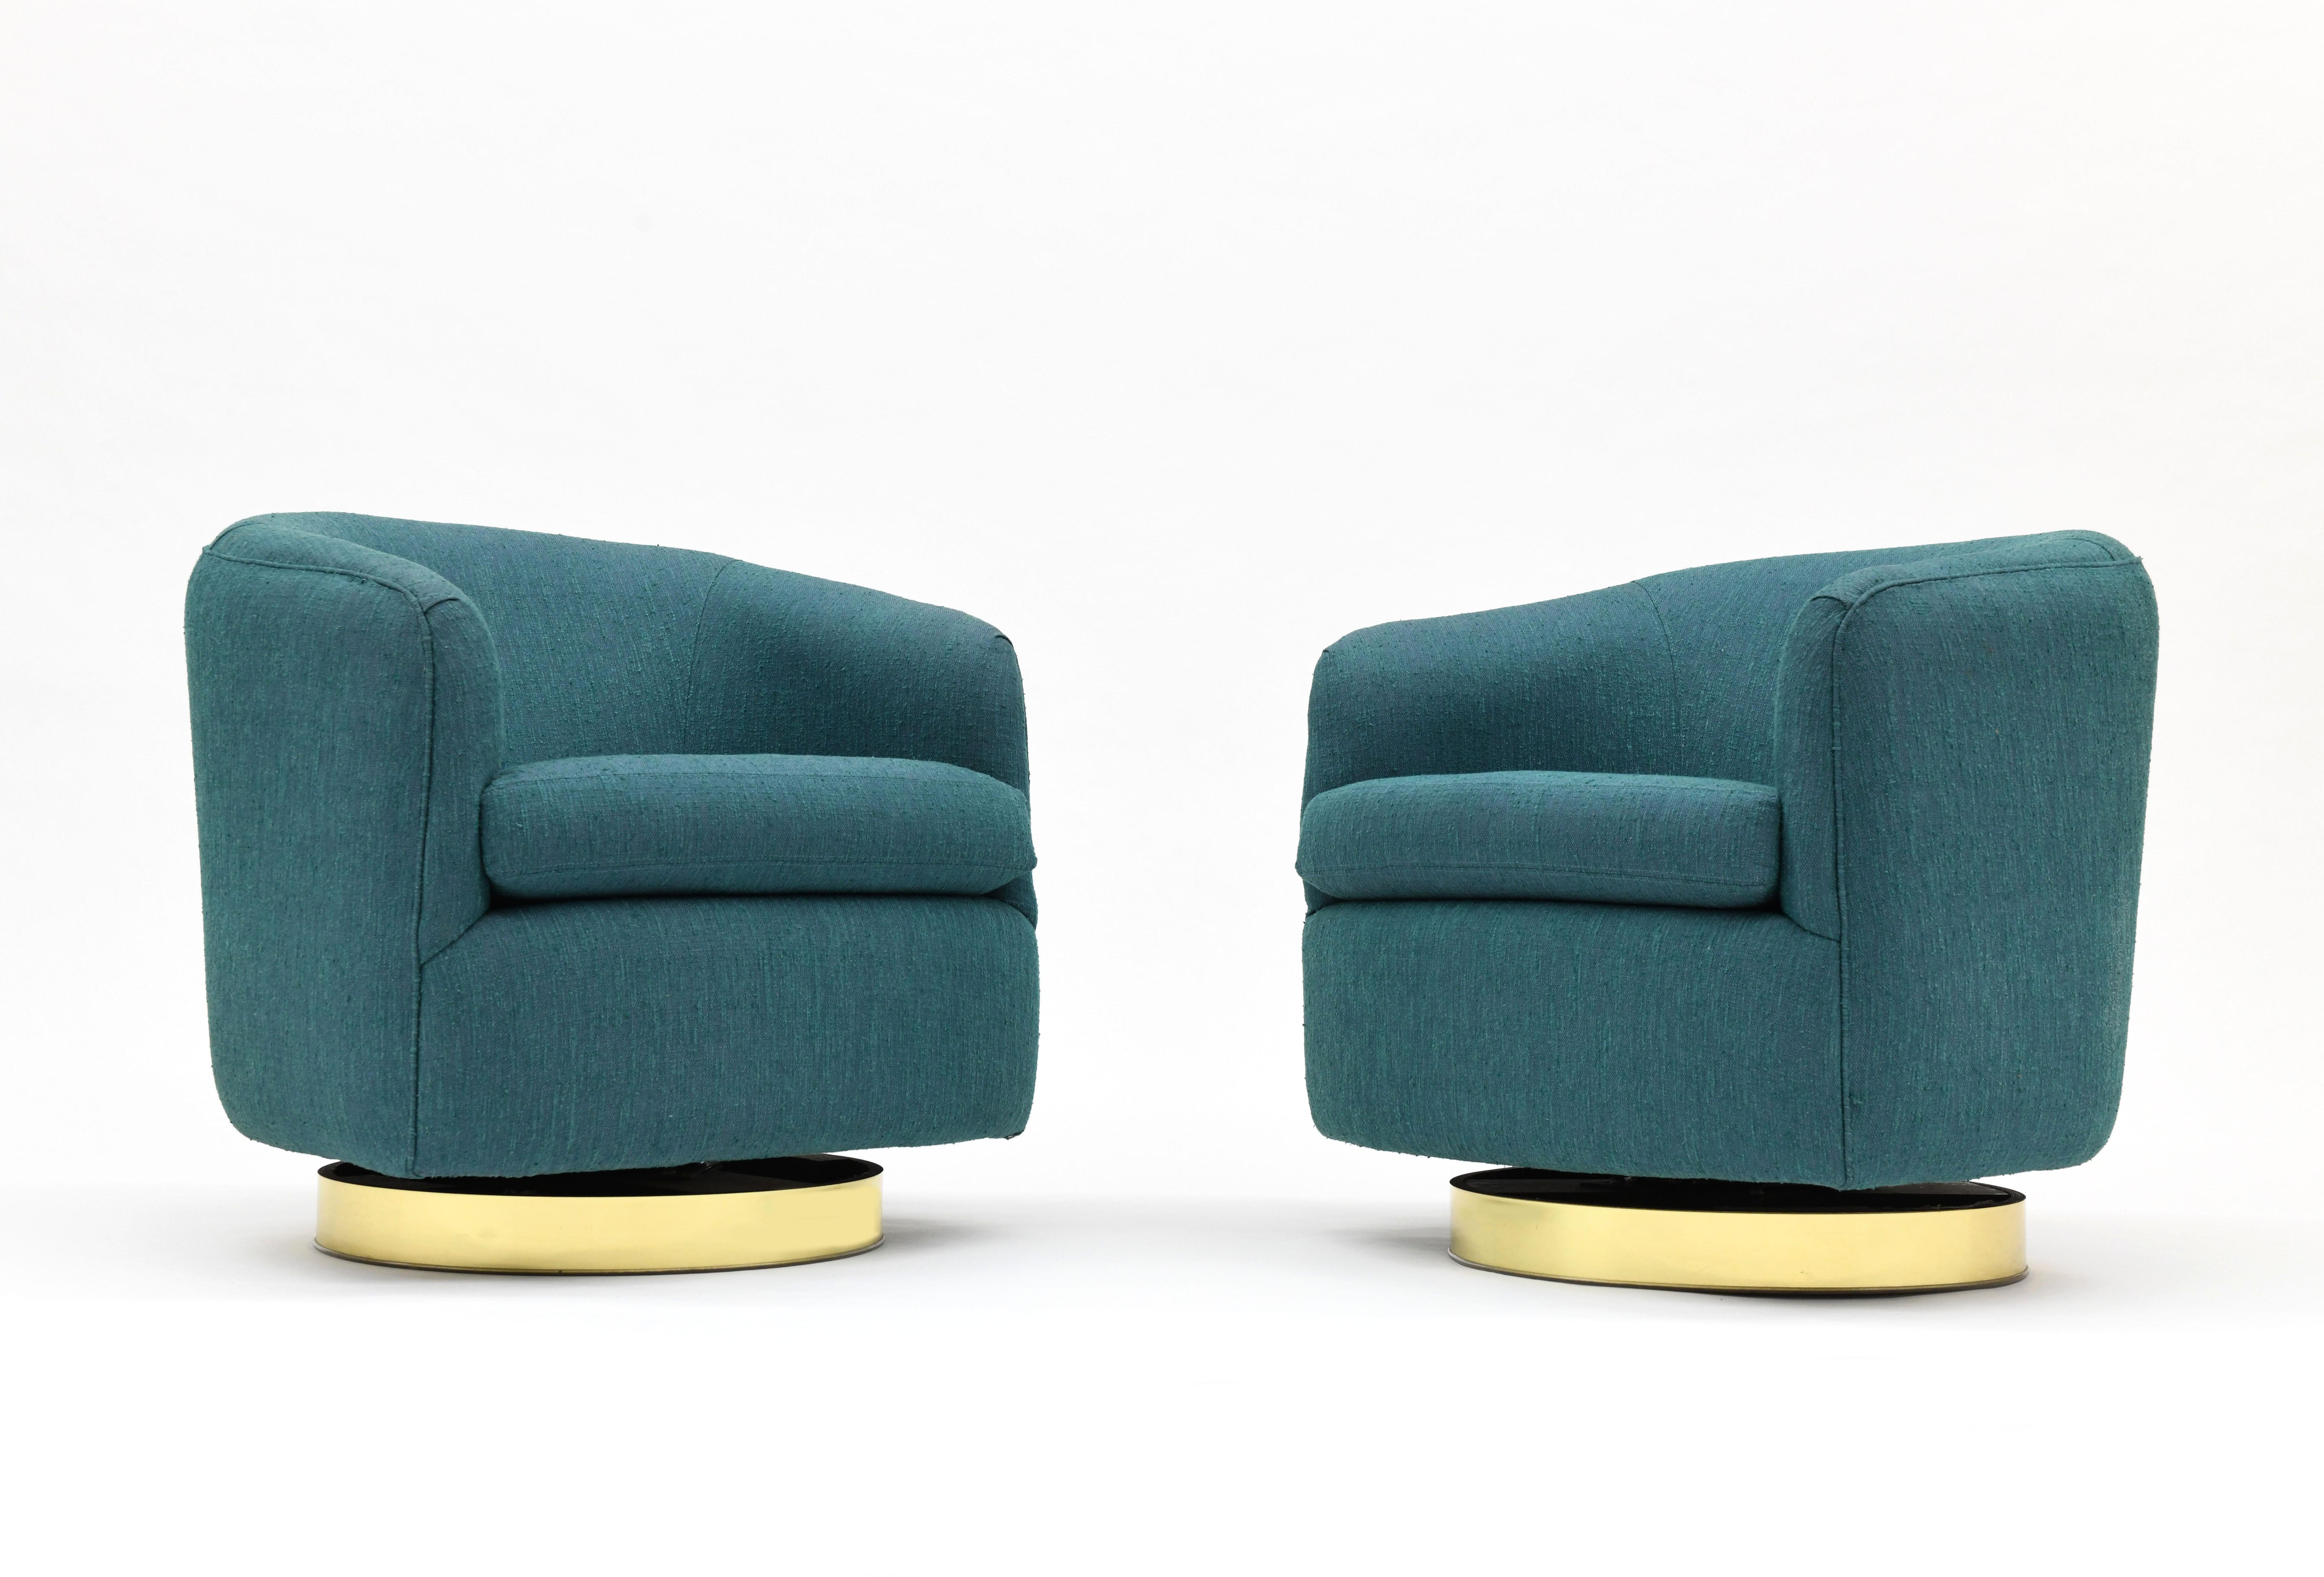 Excellent pair of barrel lounge chairs by Milo Baughman for Thayer Coggin. Chairs swivel and tilt back. Bases are round with brass detailing. Chairs retain the Thayer Coggin label.